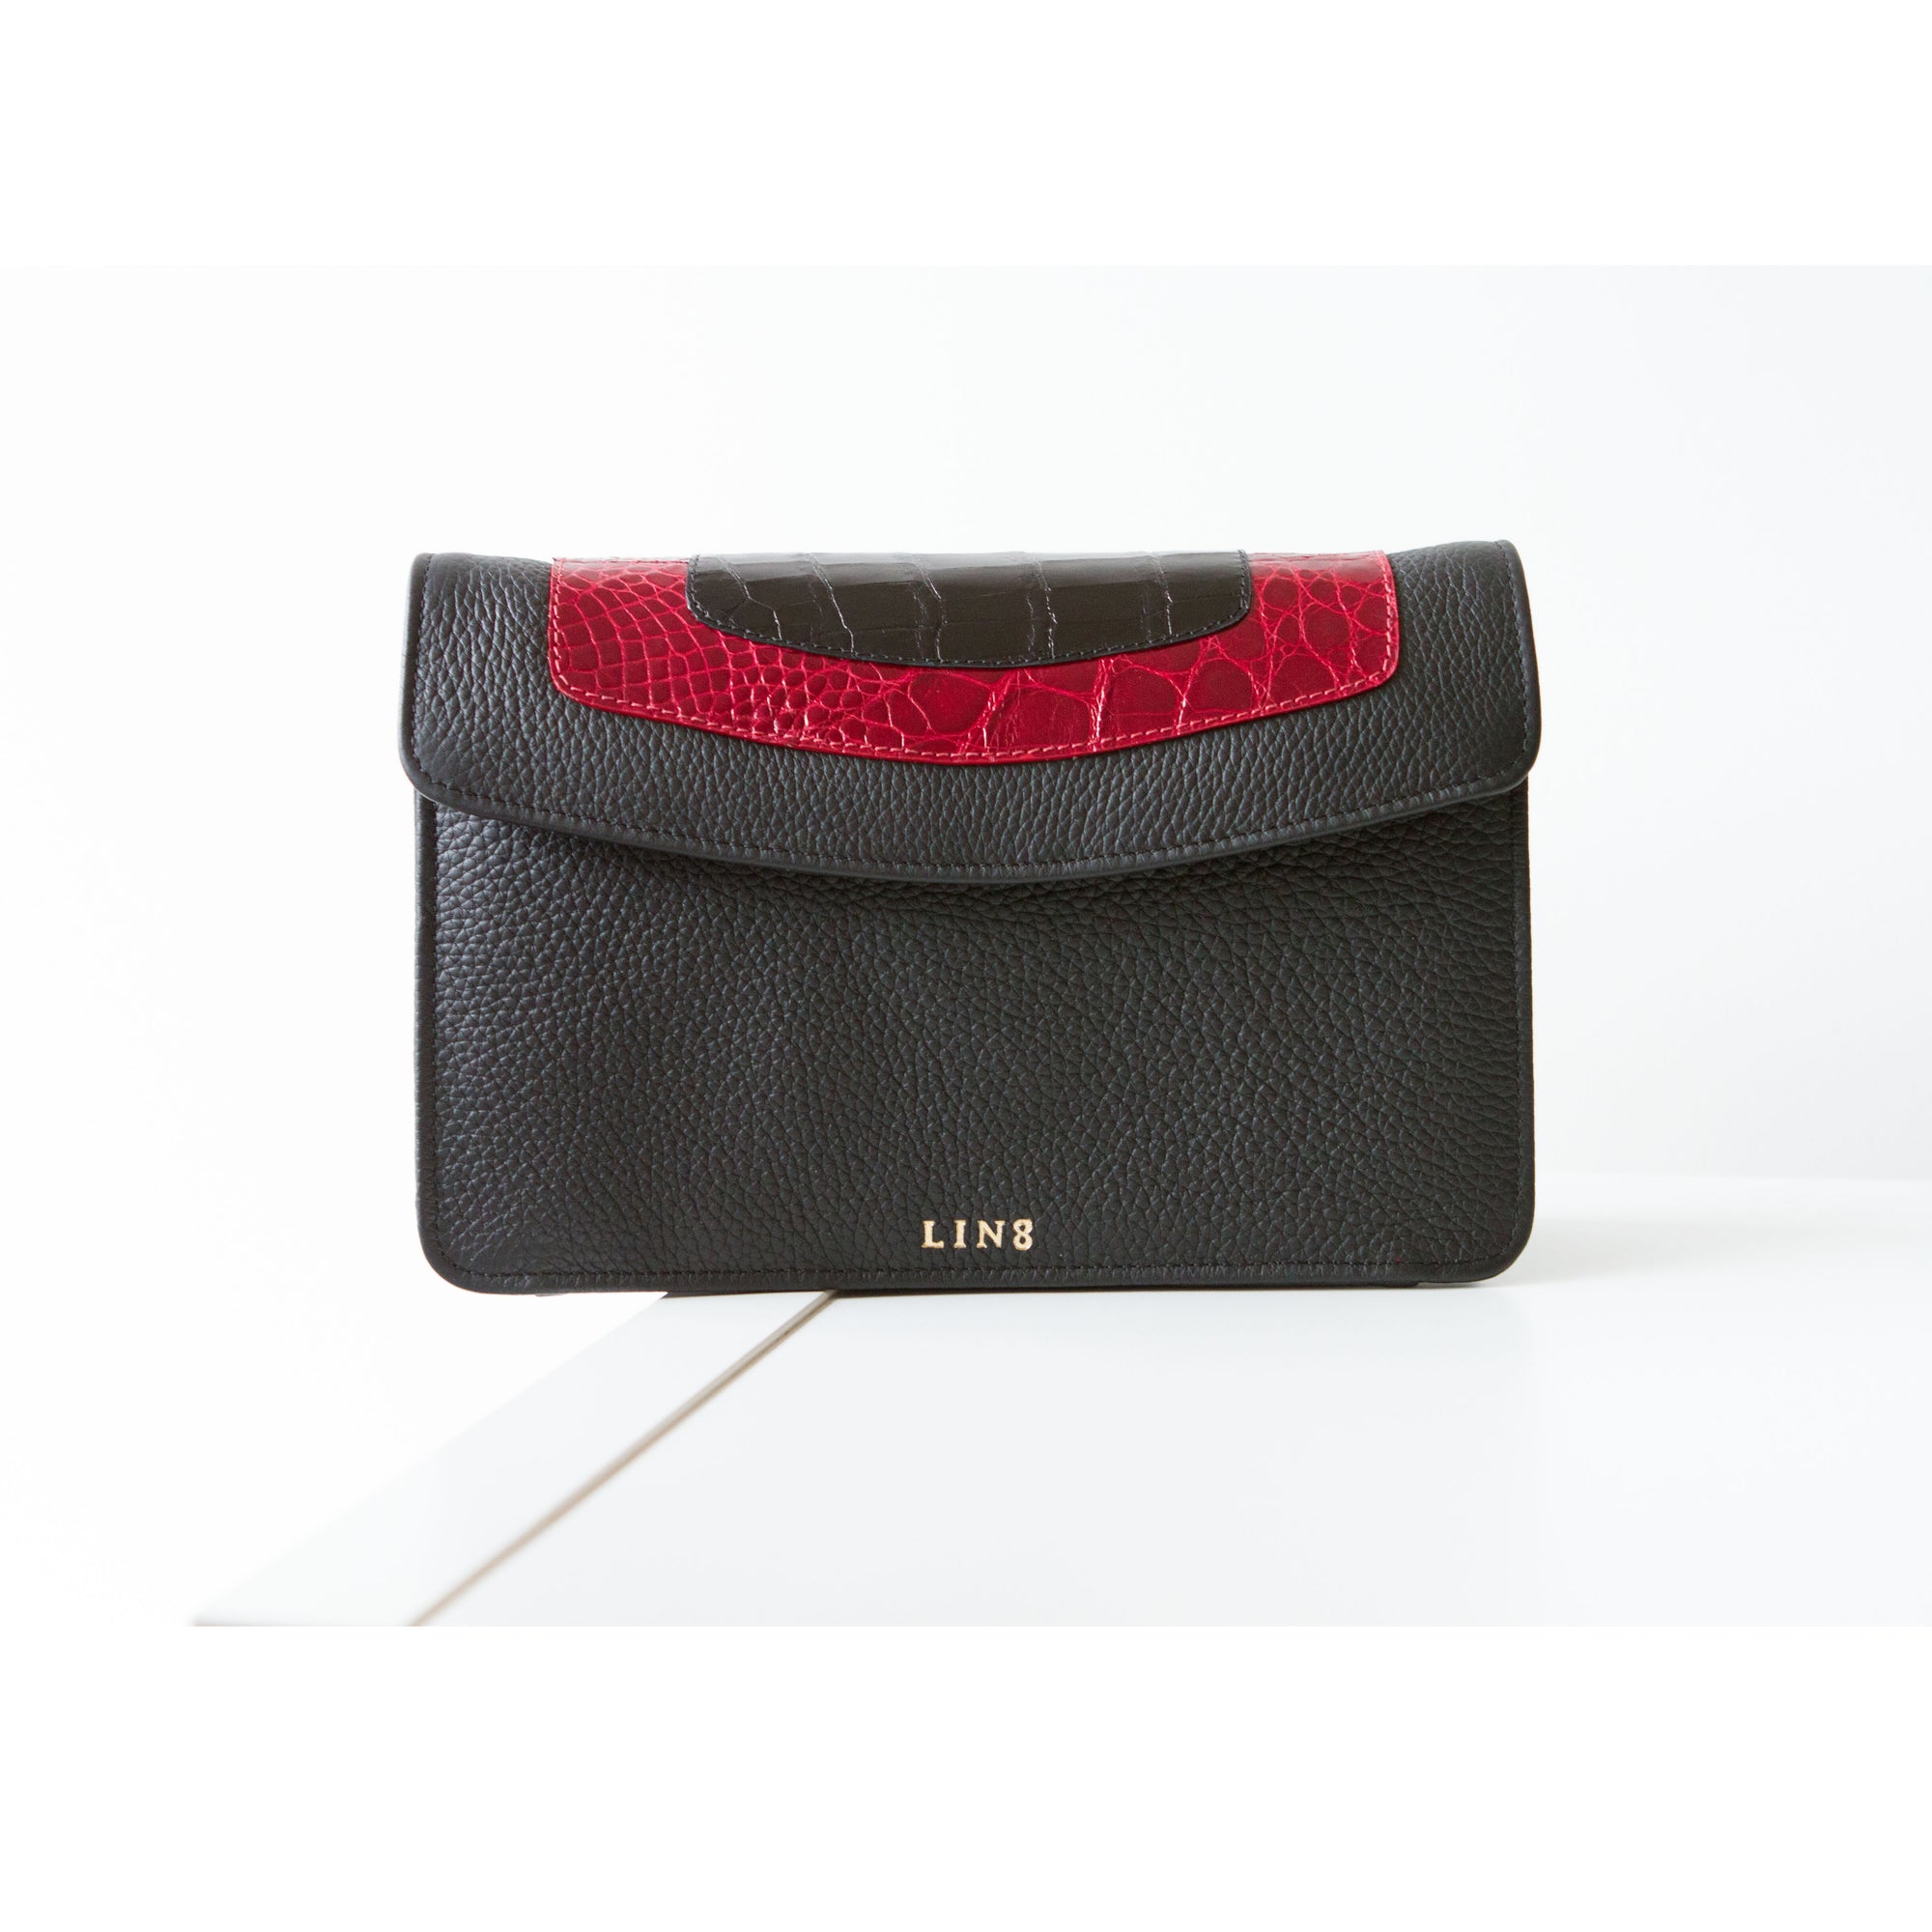 LIN8 Australia’s bespoke luxury leather goods made in Australia with concierge design services. Design, create, tailor, customise your own leather goods, bag, handbag, purse, clutch, wallet, pet dog collar, gym lifting pulling straps